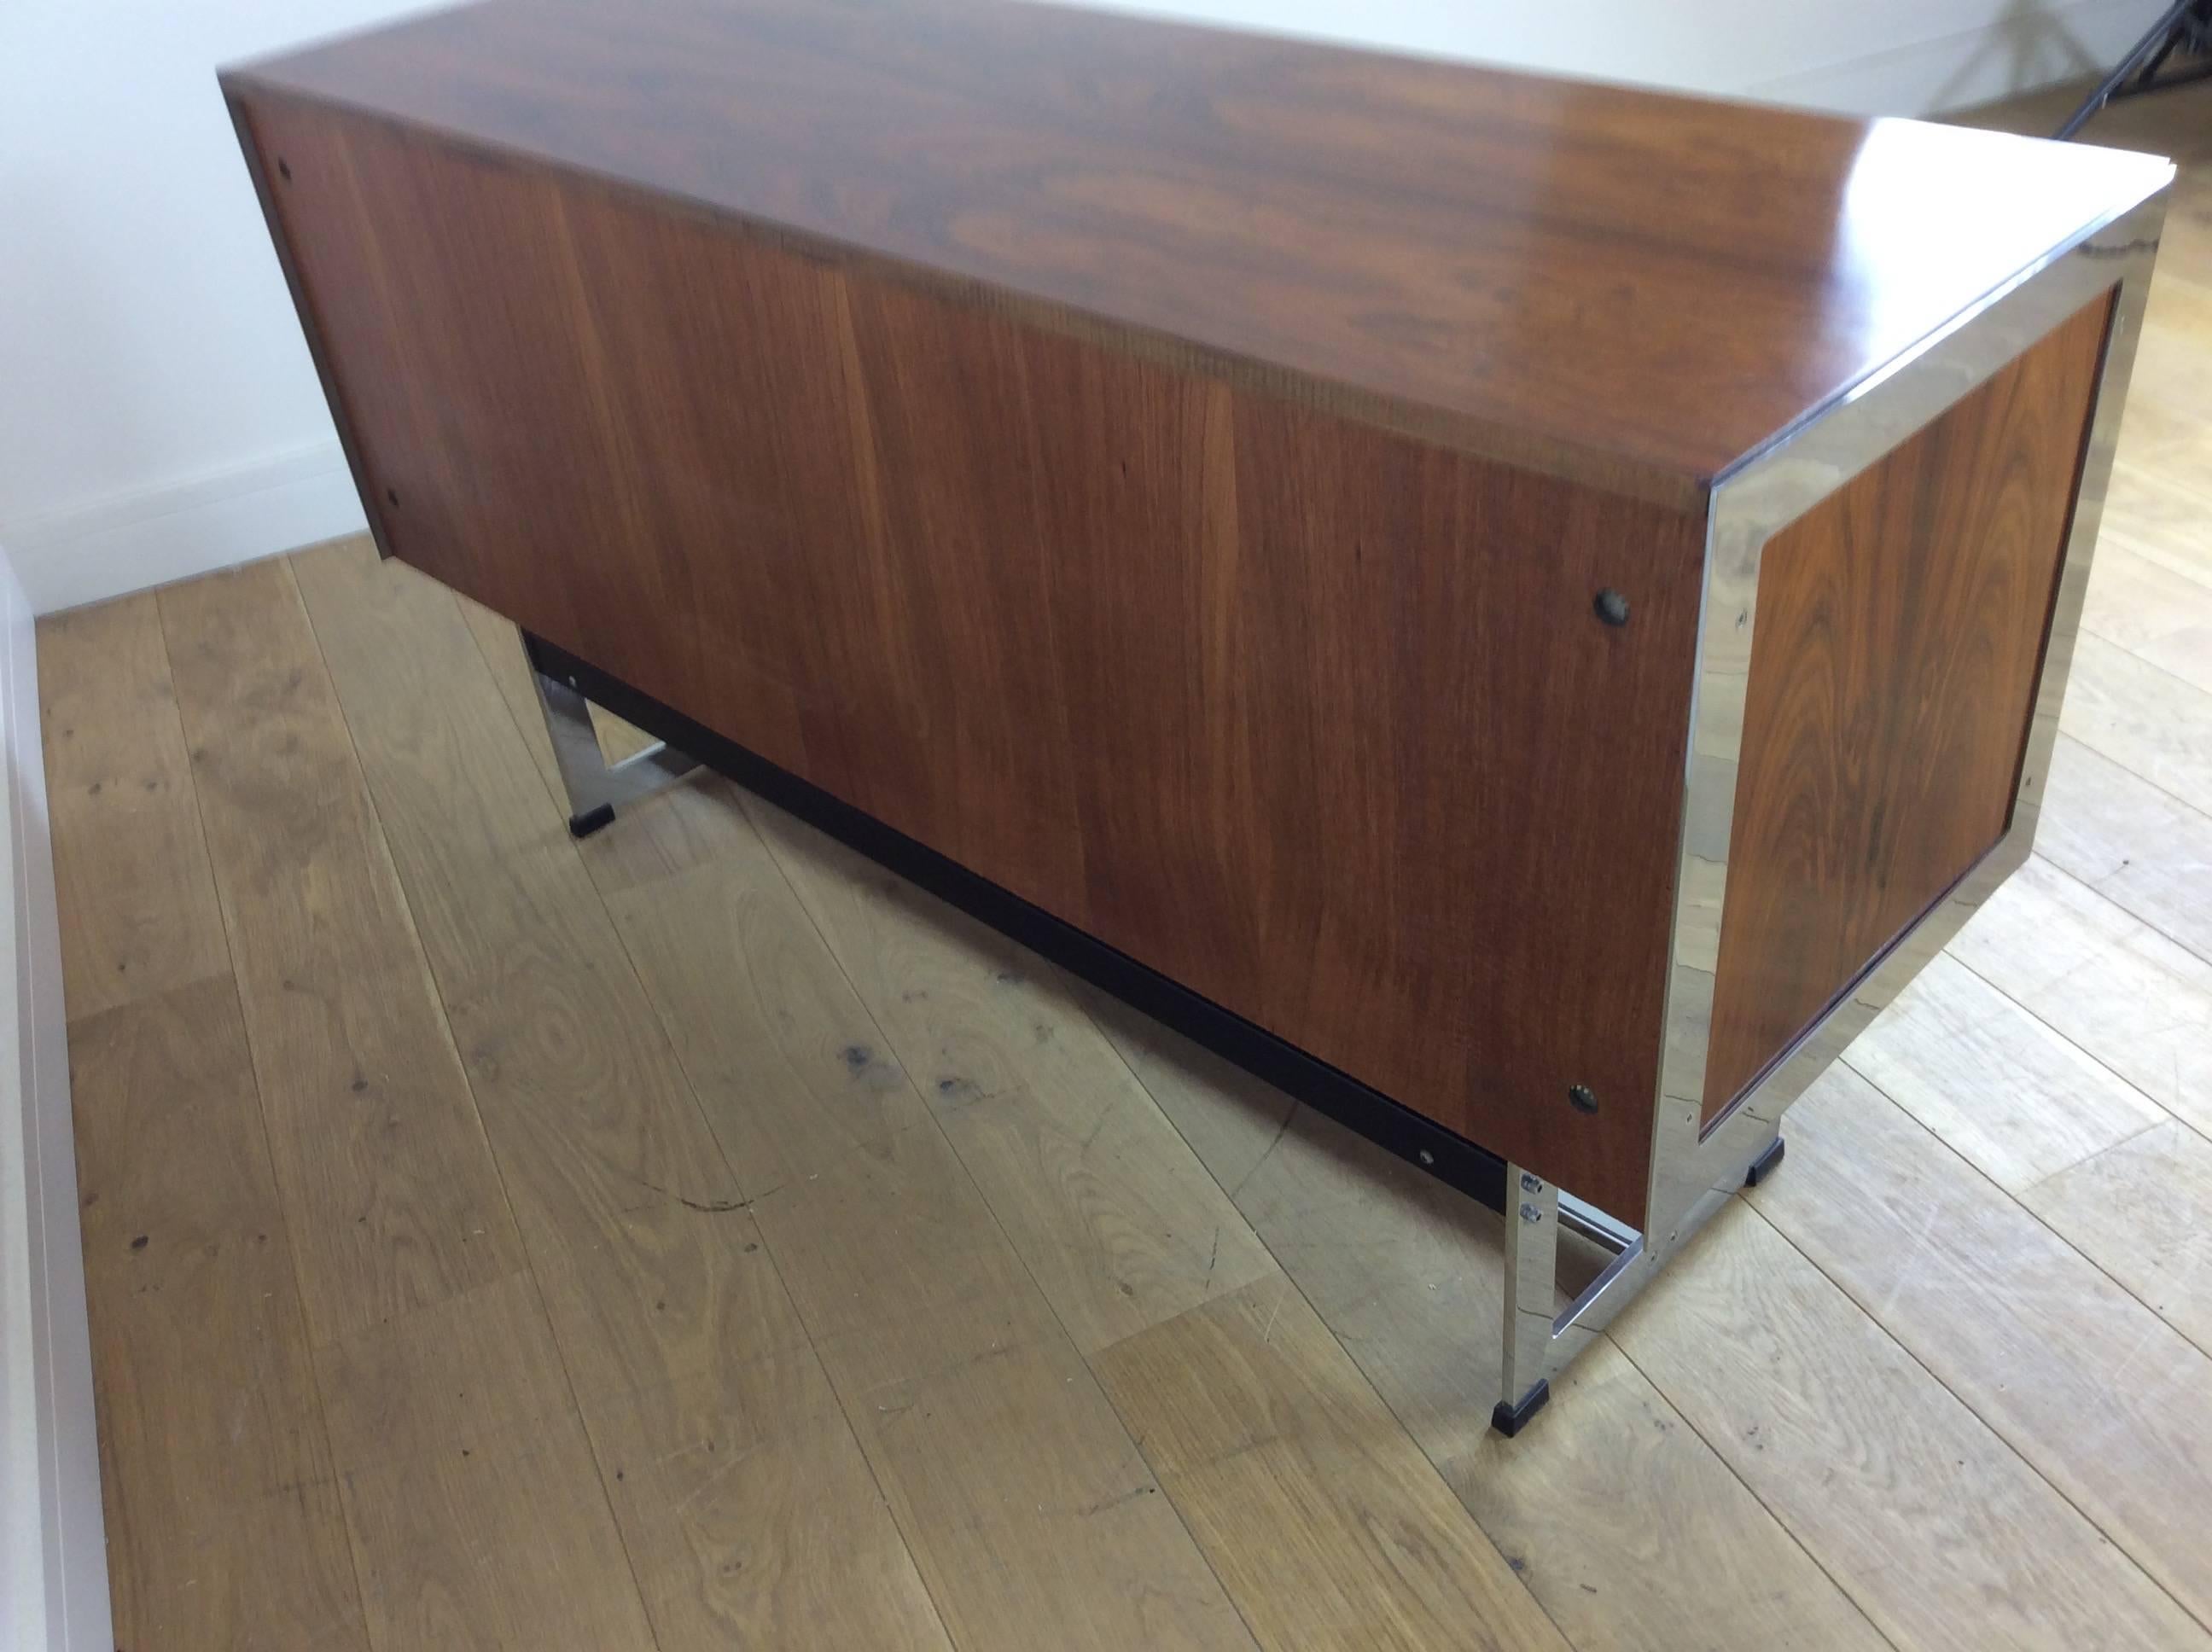 English Midcentury Rosewood and Chrome Sideboard or Credenza by Merrow Associates